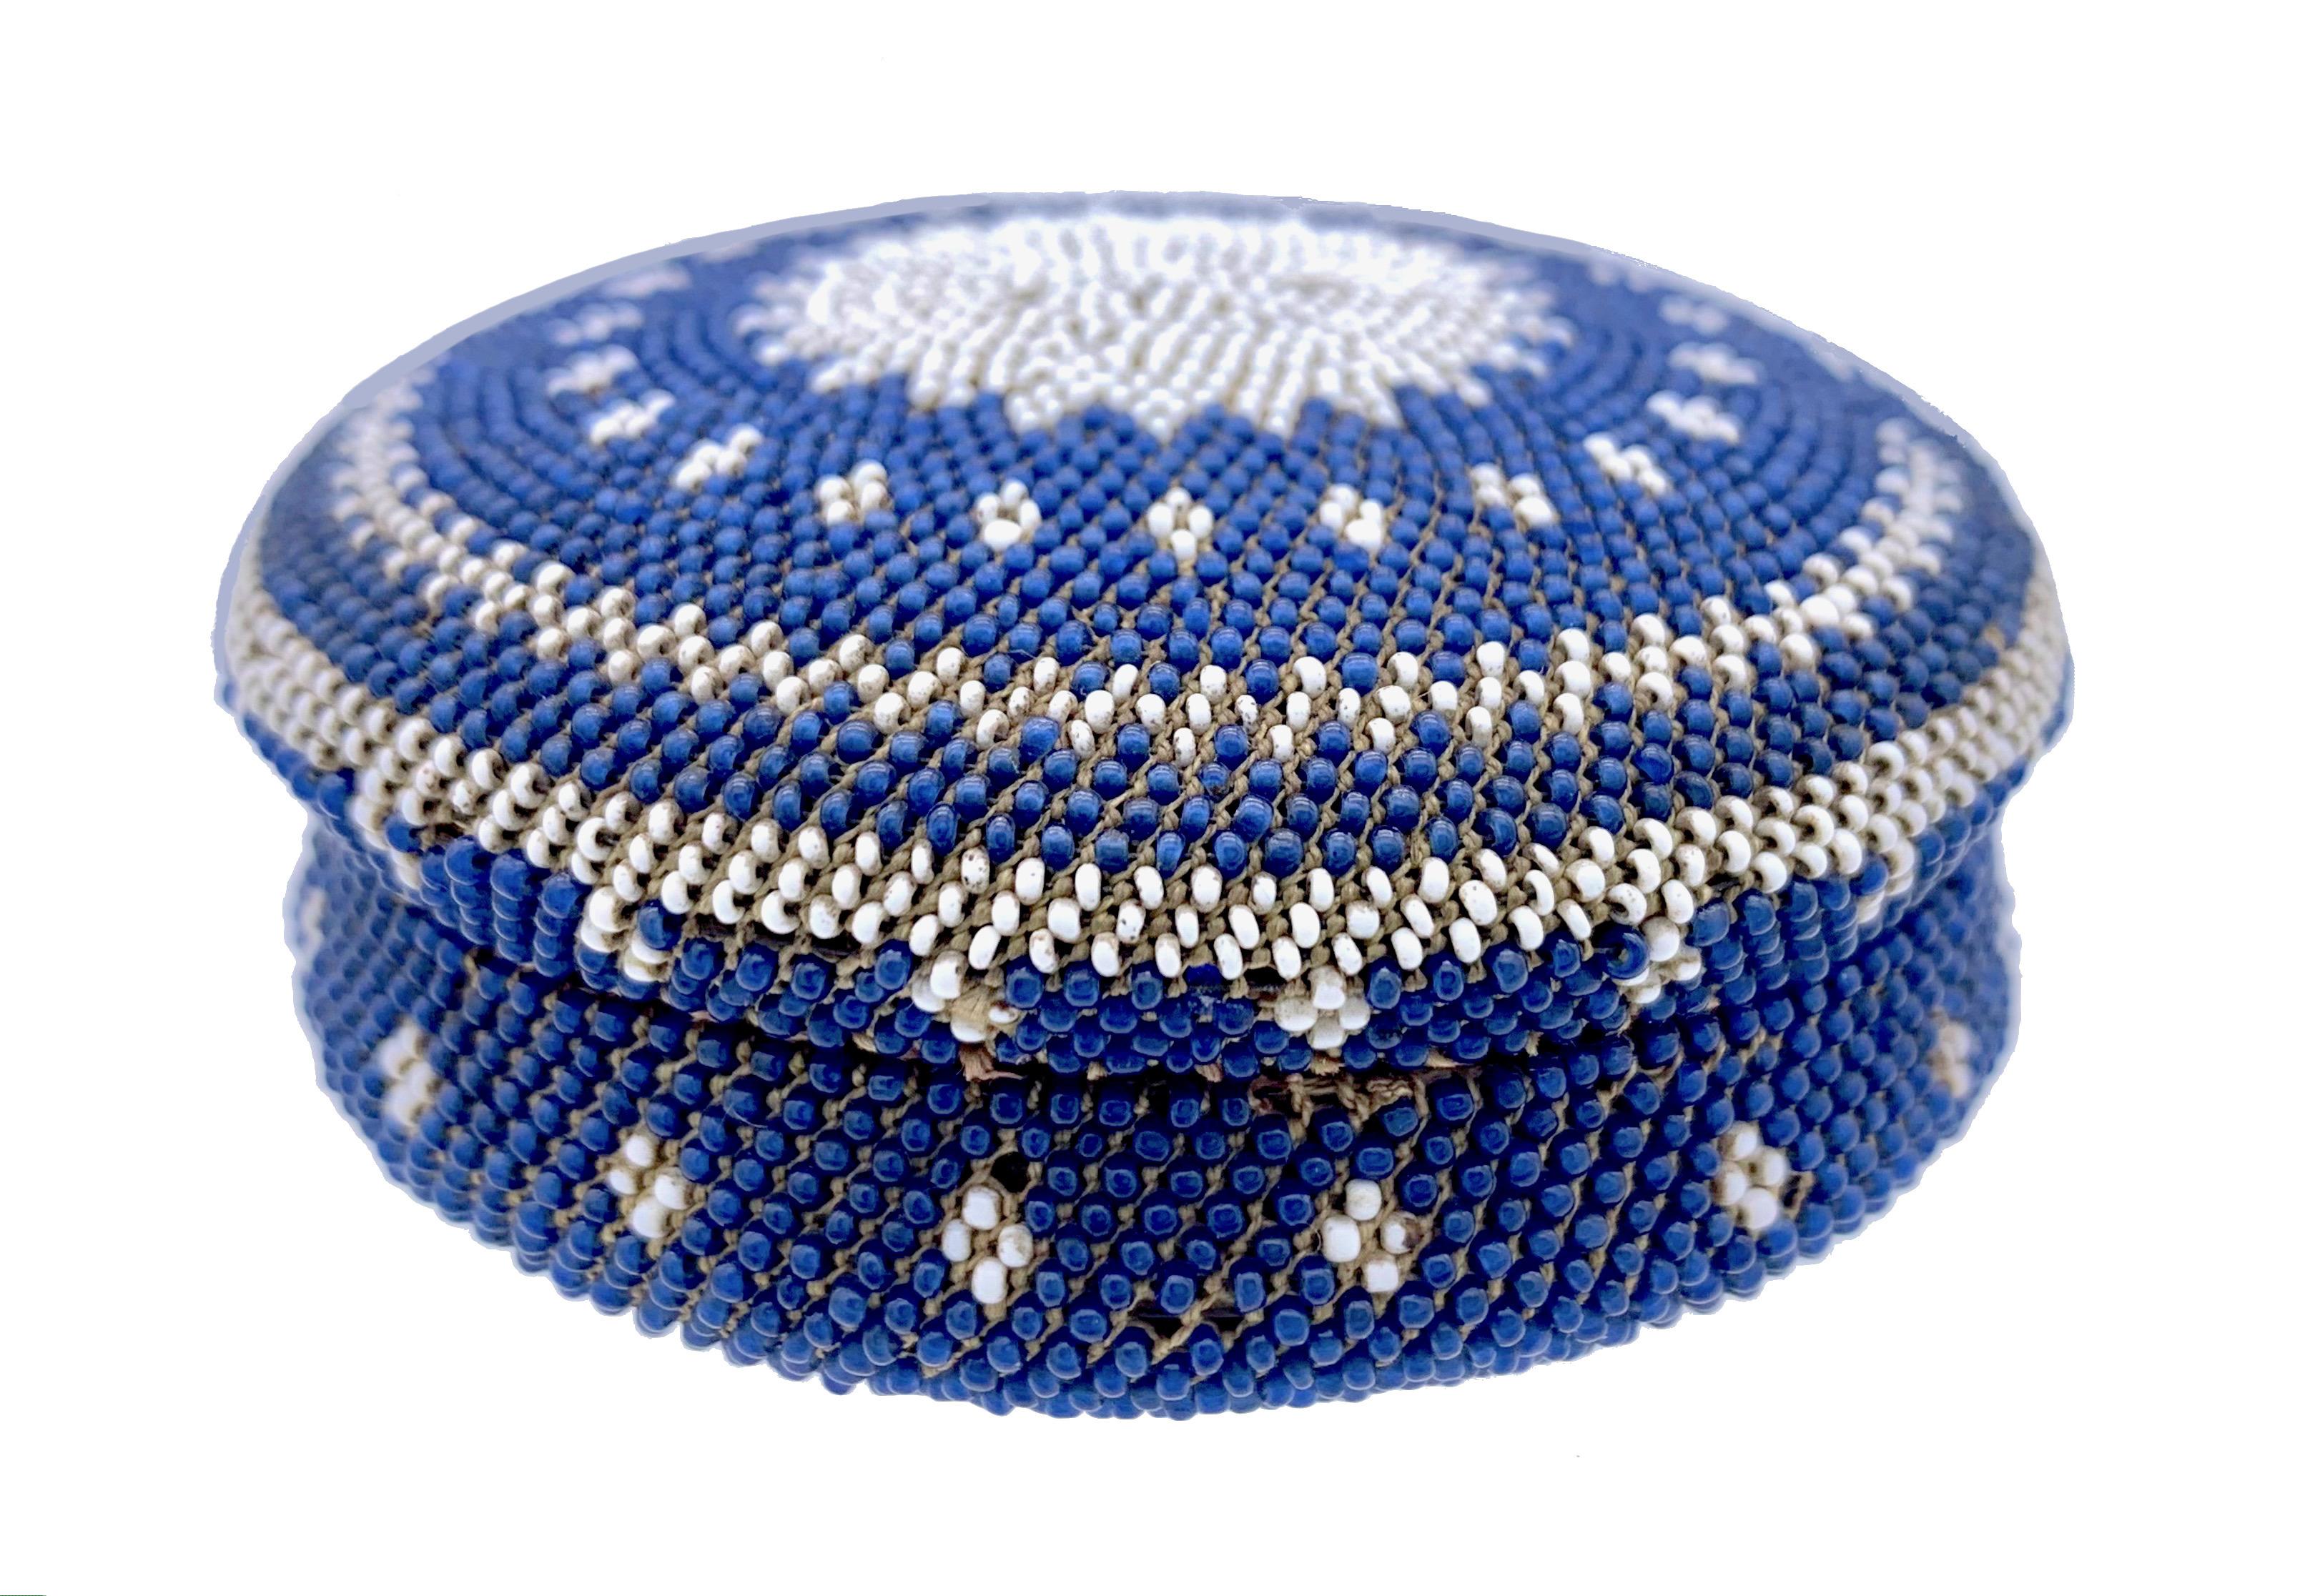 This delicate snuffbox has been made out of pressed horn and is covered entirely in blue and white glass beads threaded on cotton string. The lid is decorated with a sun emblem, a lozenge and a zigzag pattern and the French words DON DAMITIE, gift